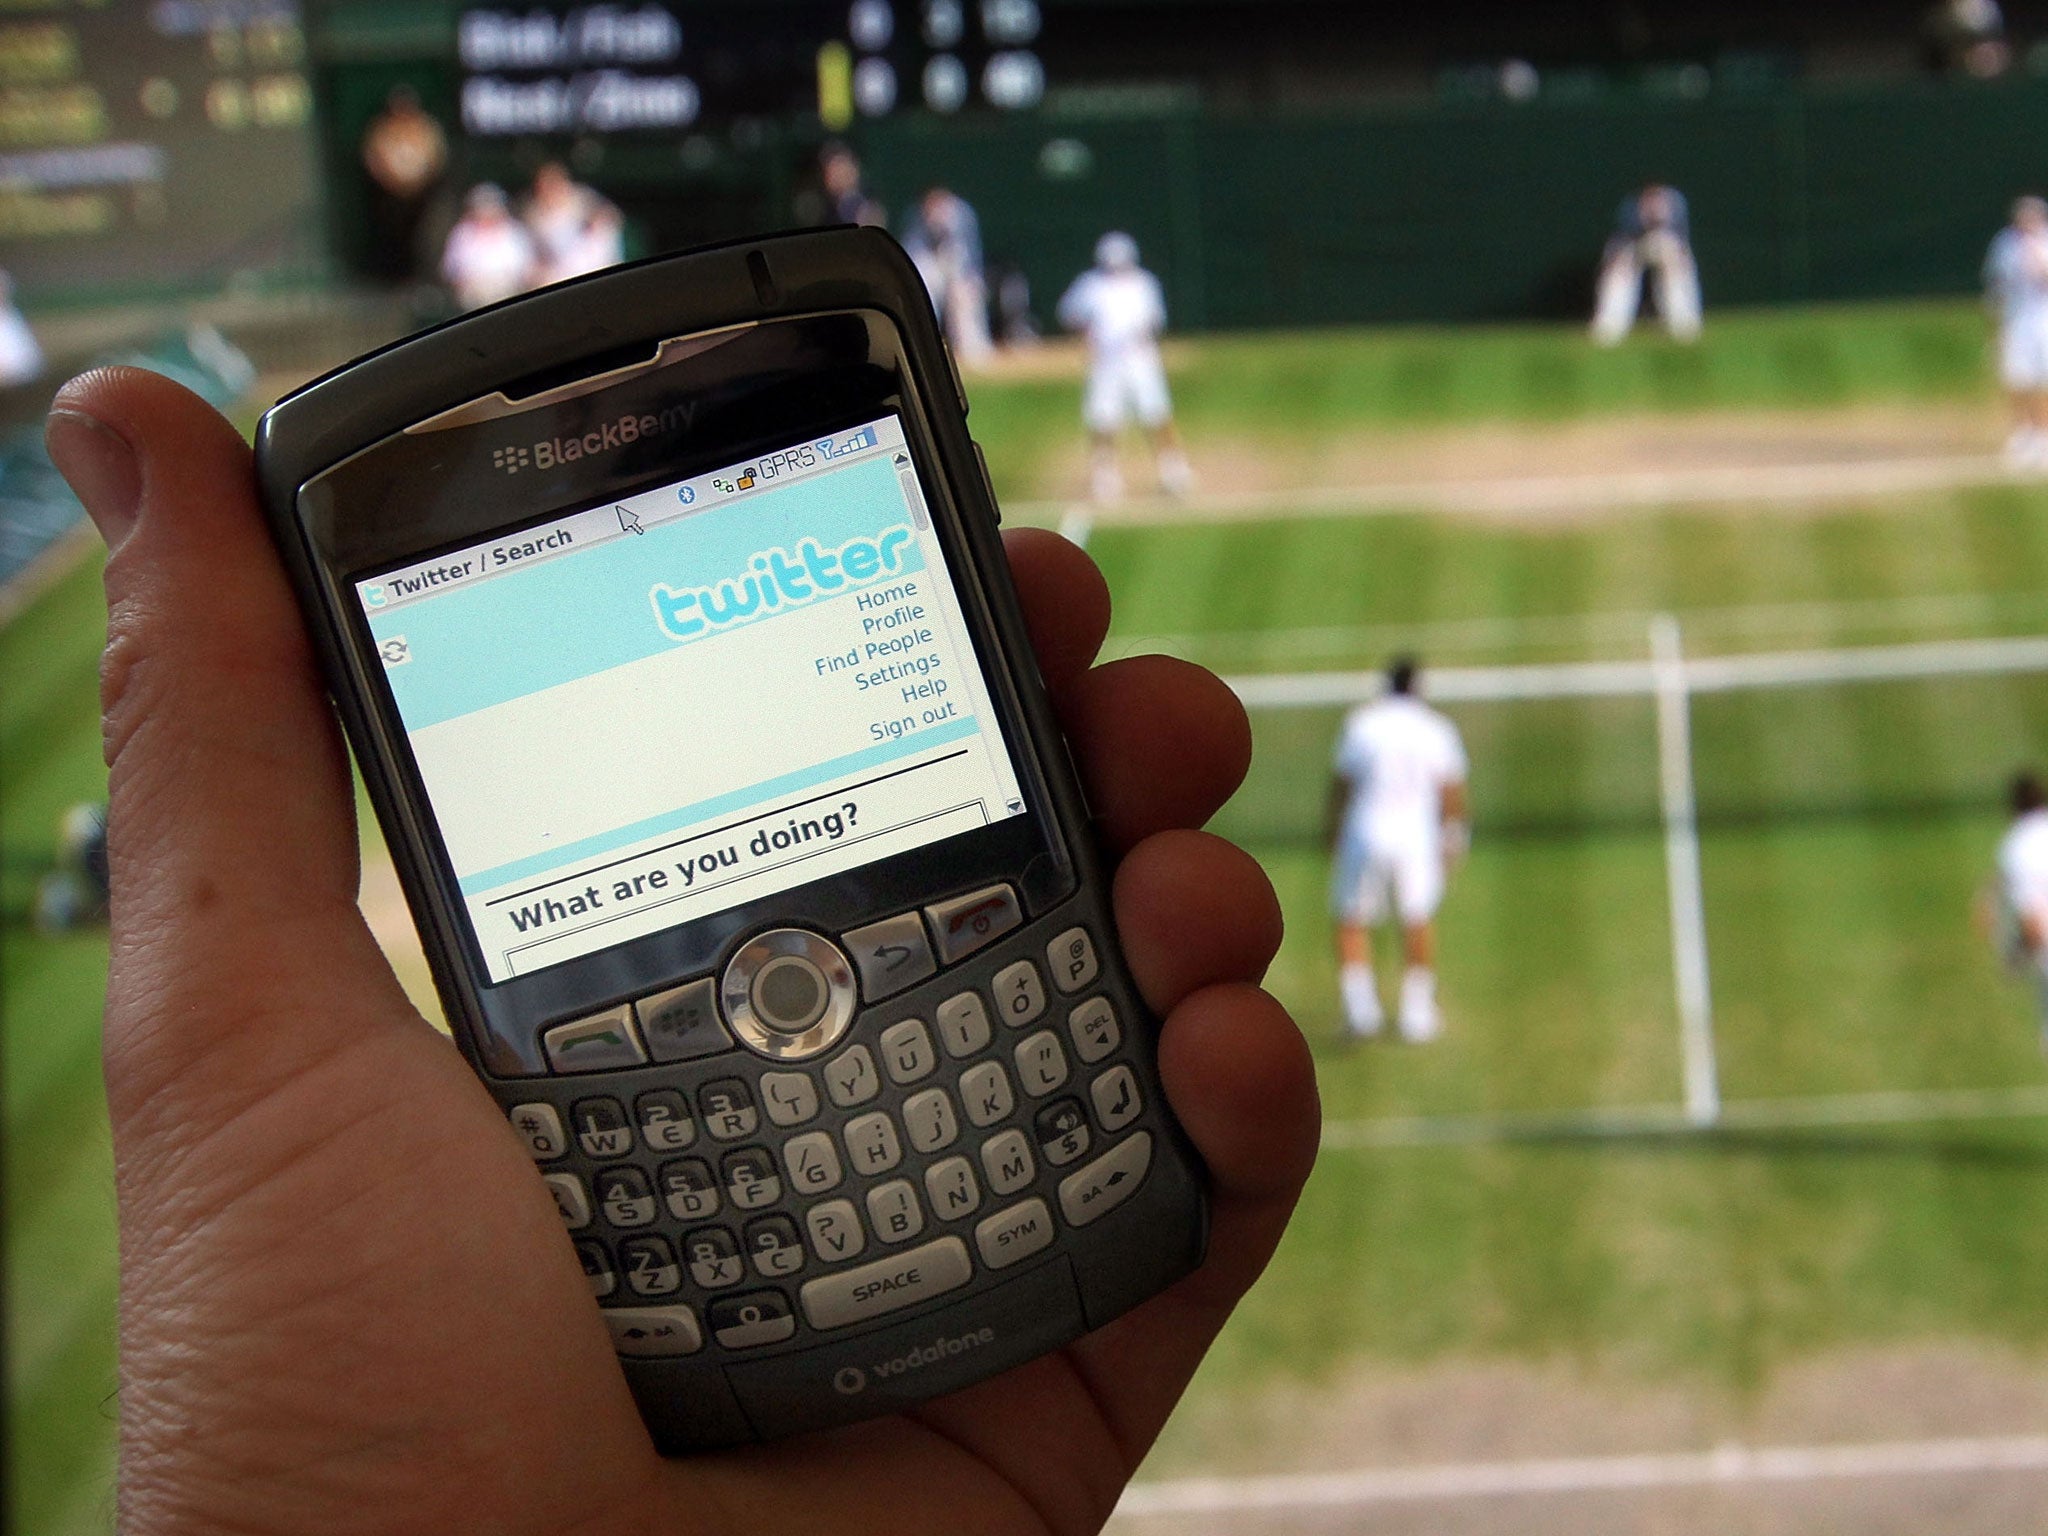 Twitter is displayed on a mobile phone in front of a television showing the tennis at Wimbledon on July 2, 2009 in London.